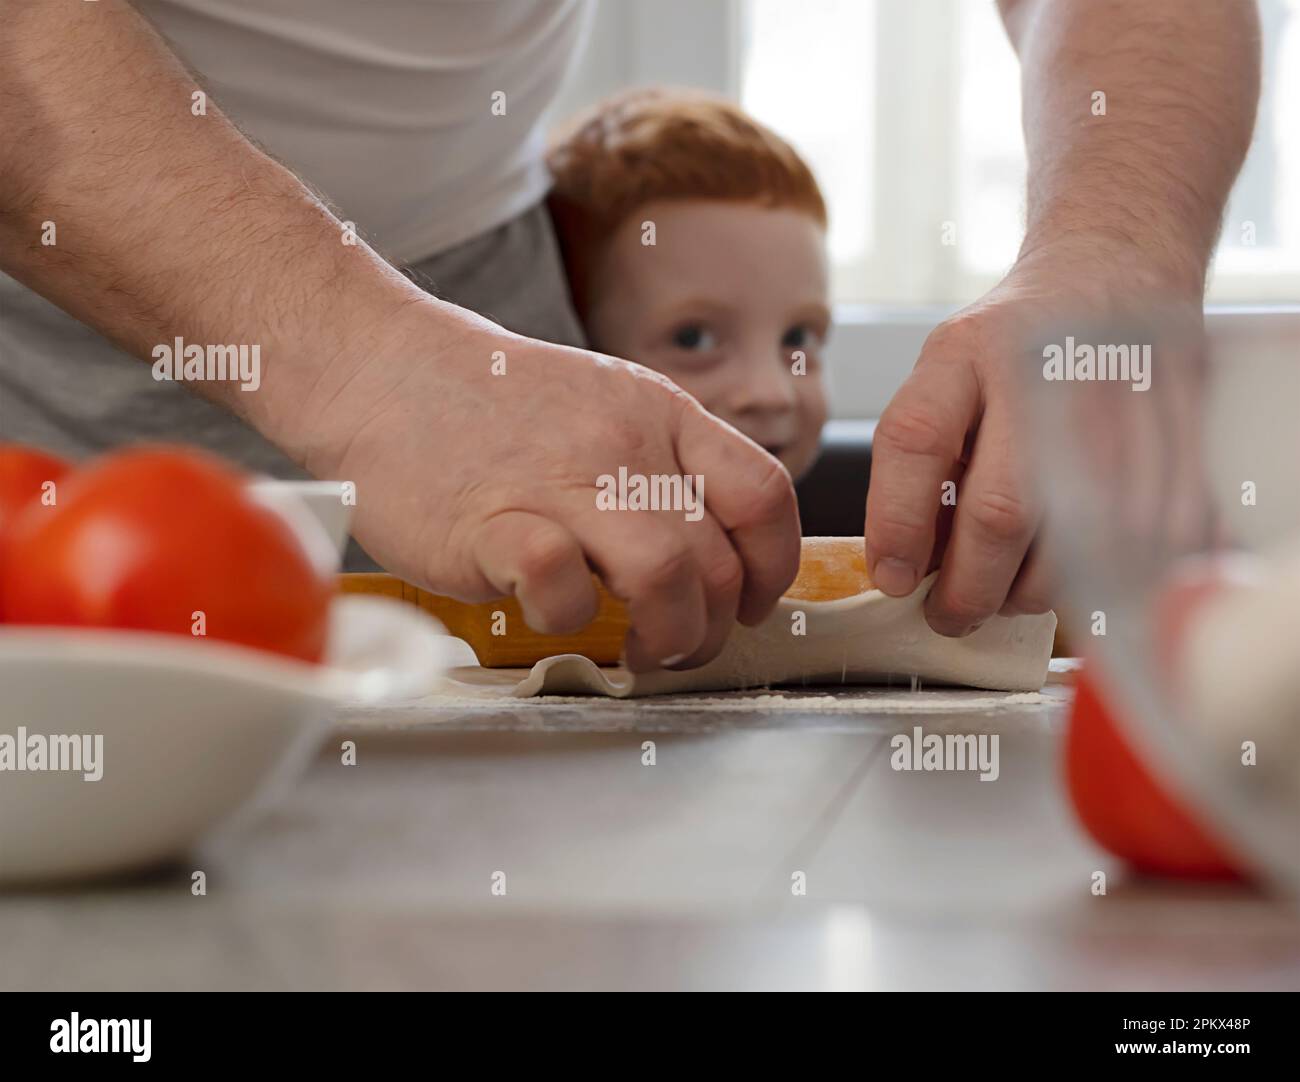 Male hands roll out the dough, the baby looks out. Stock Photo